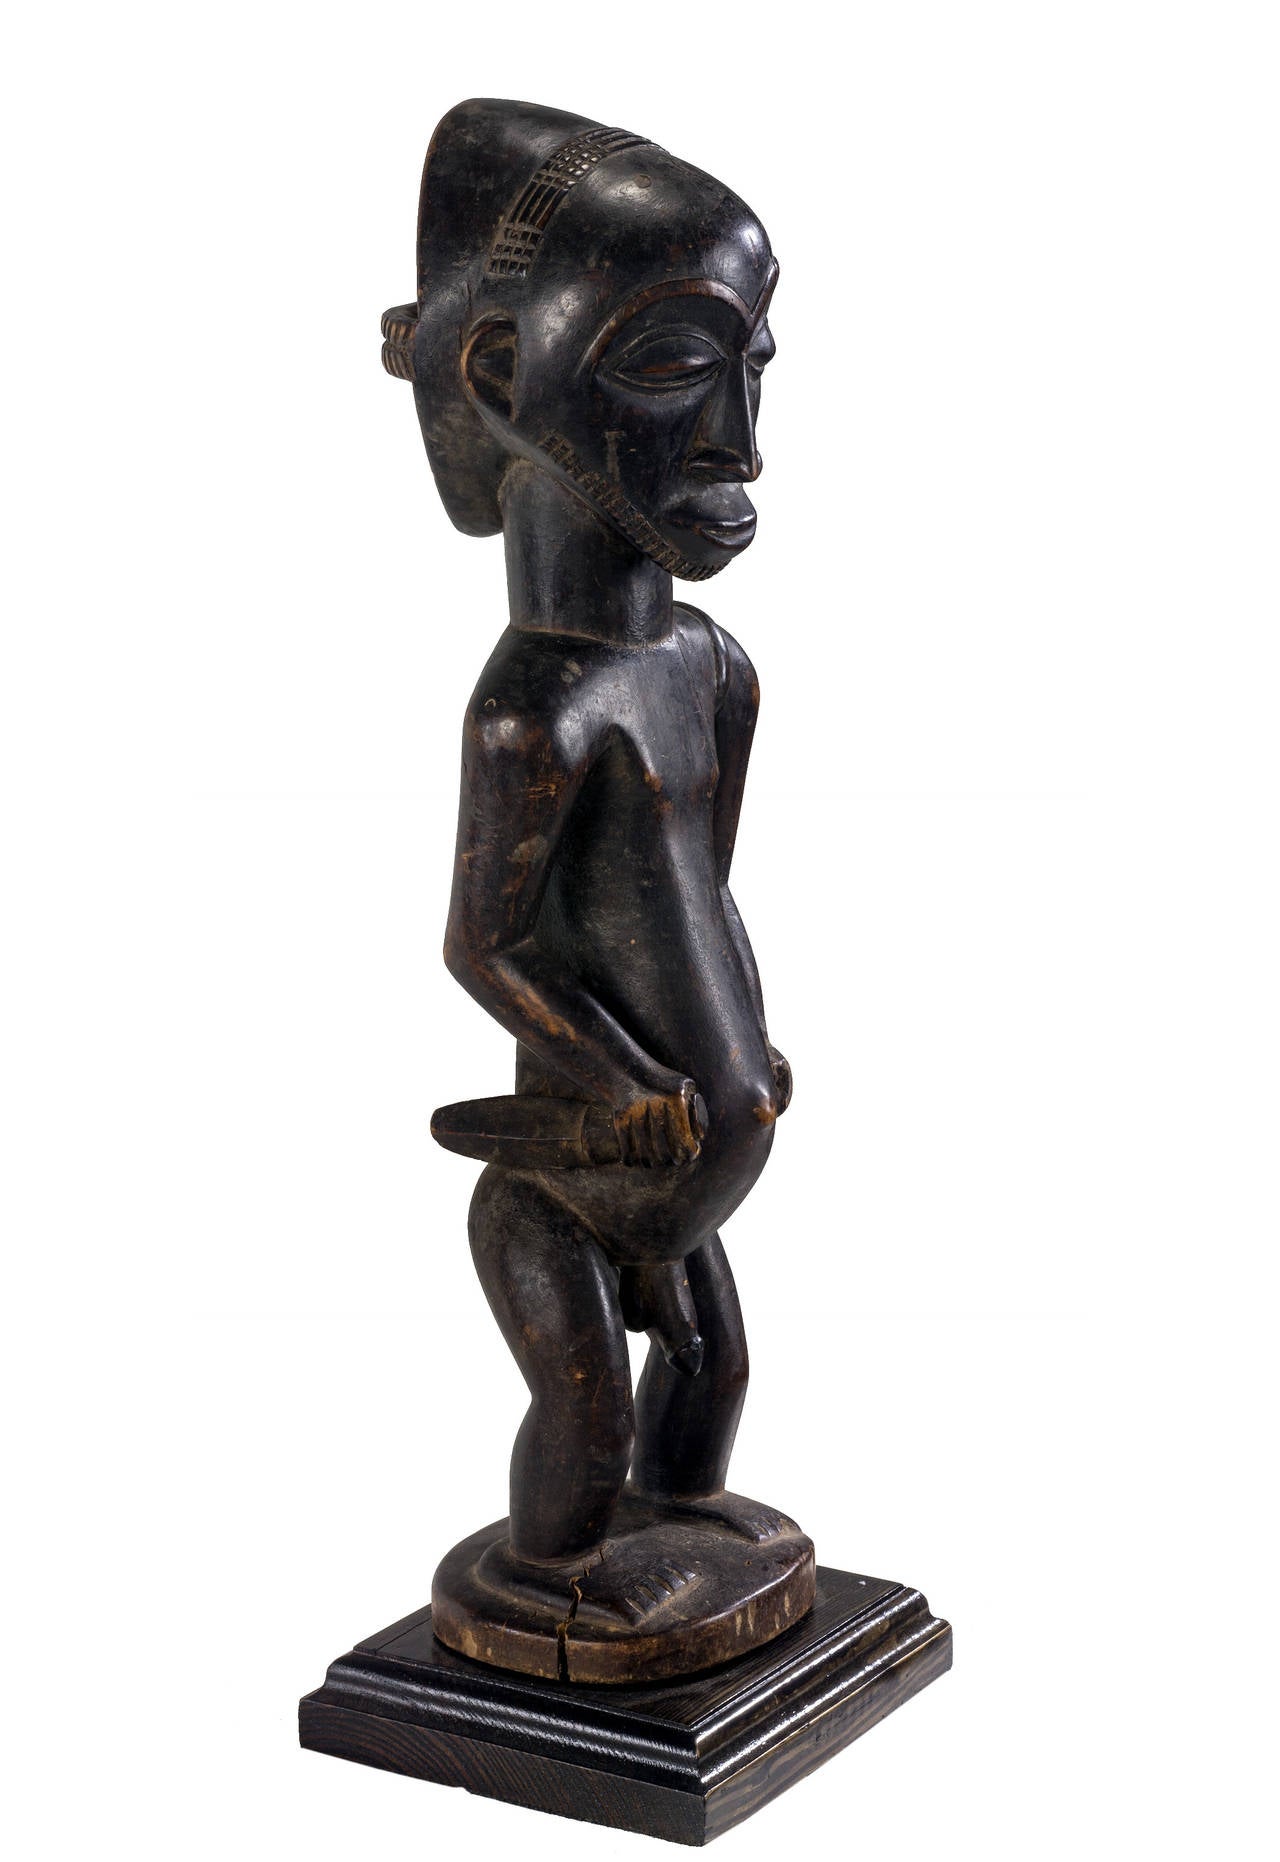 Important Hemba male hunter from congo, holding a knife and shield on his hands while carrying arrows at her back with, beautiful black patina wearing a well-made coiffure which is open at the back. Traditionally these pieces were created for the